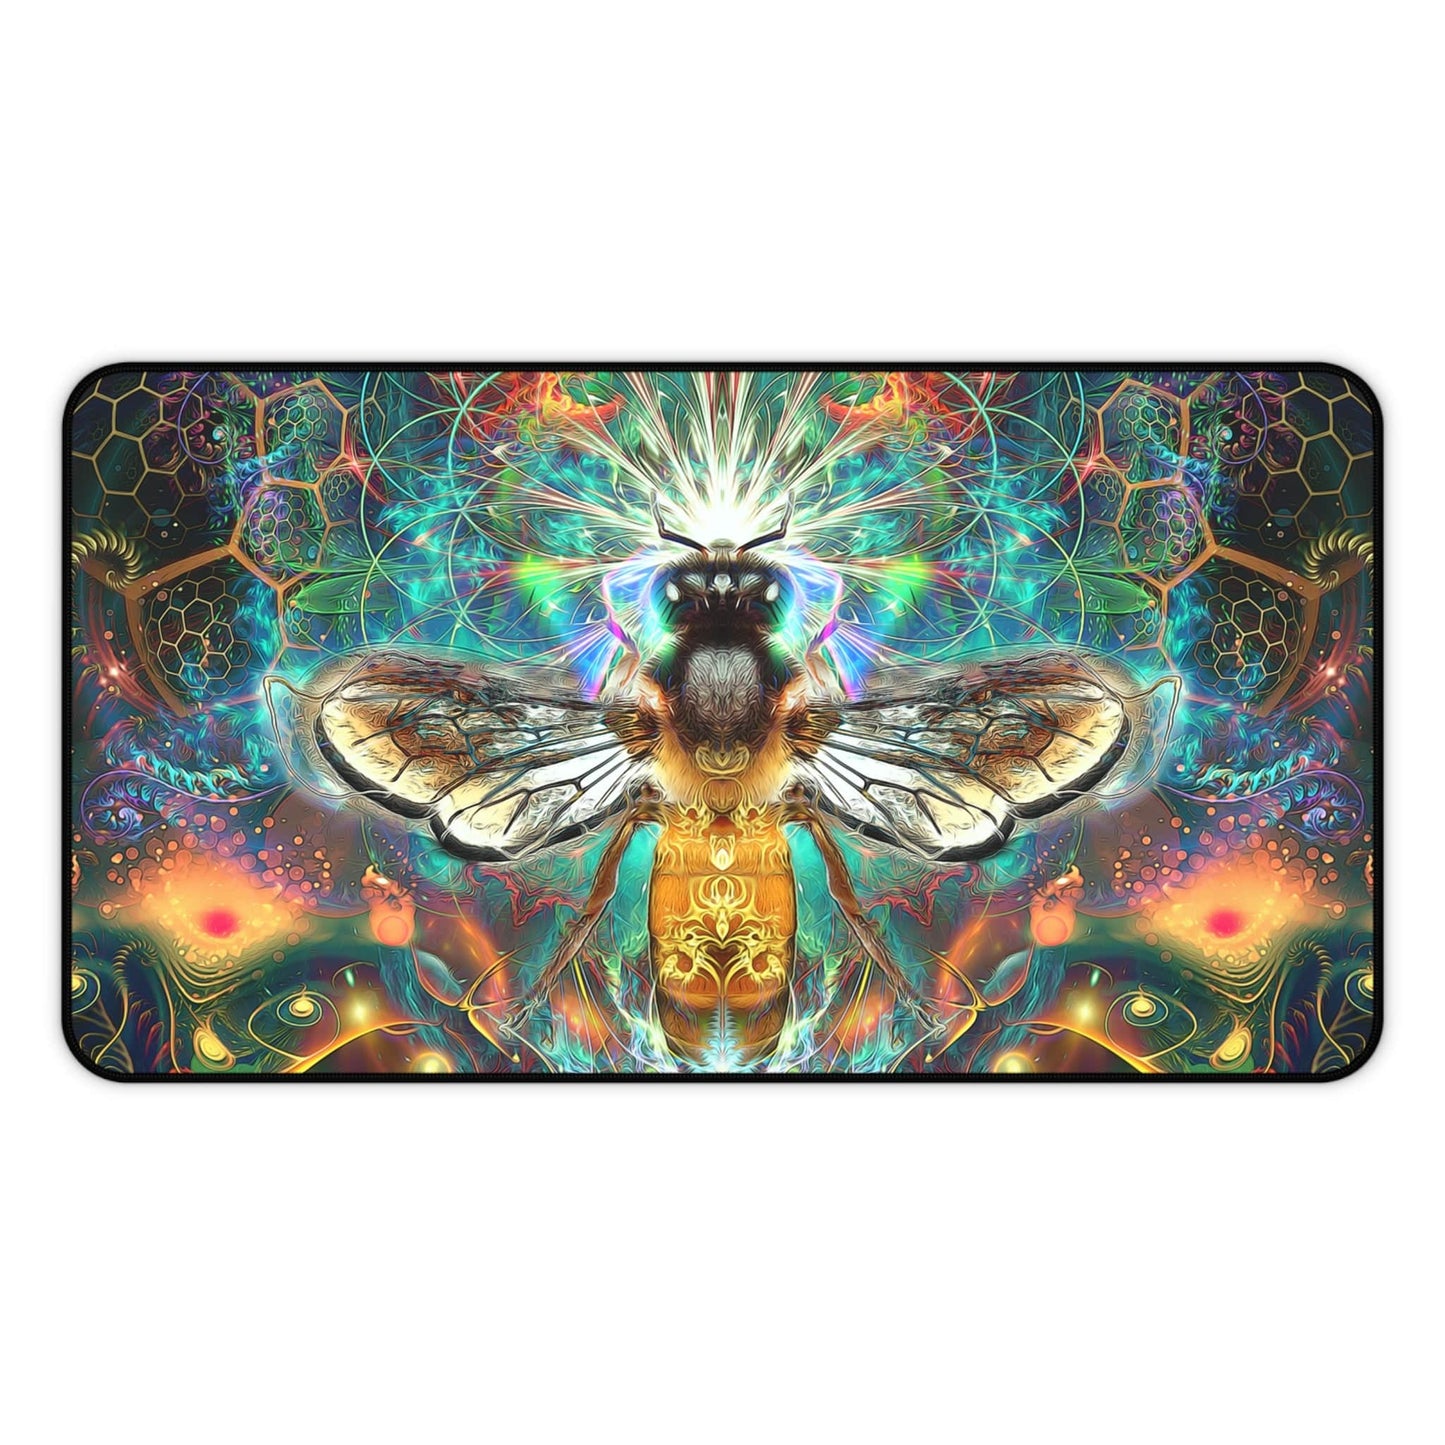 "To Bee or Not to Bee - [Bee Section]" DESK MAT / MOUSE PAD (12x18)(12x22)(15.5x31)